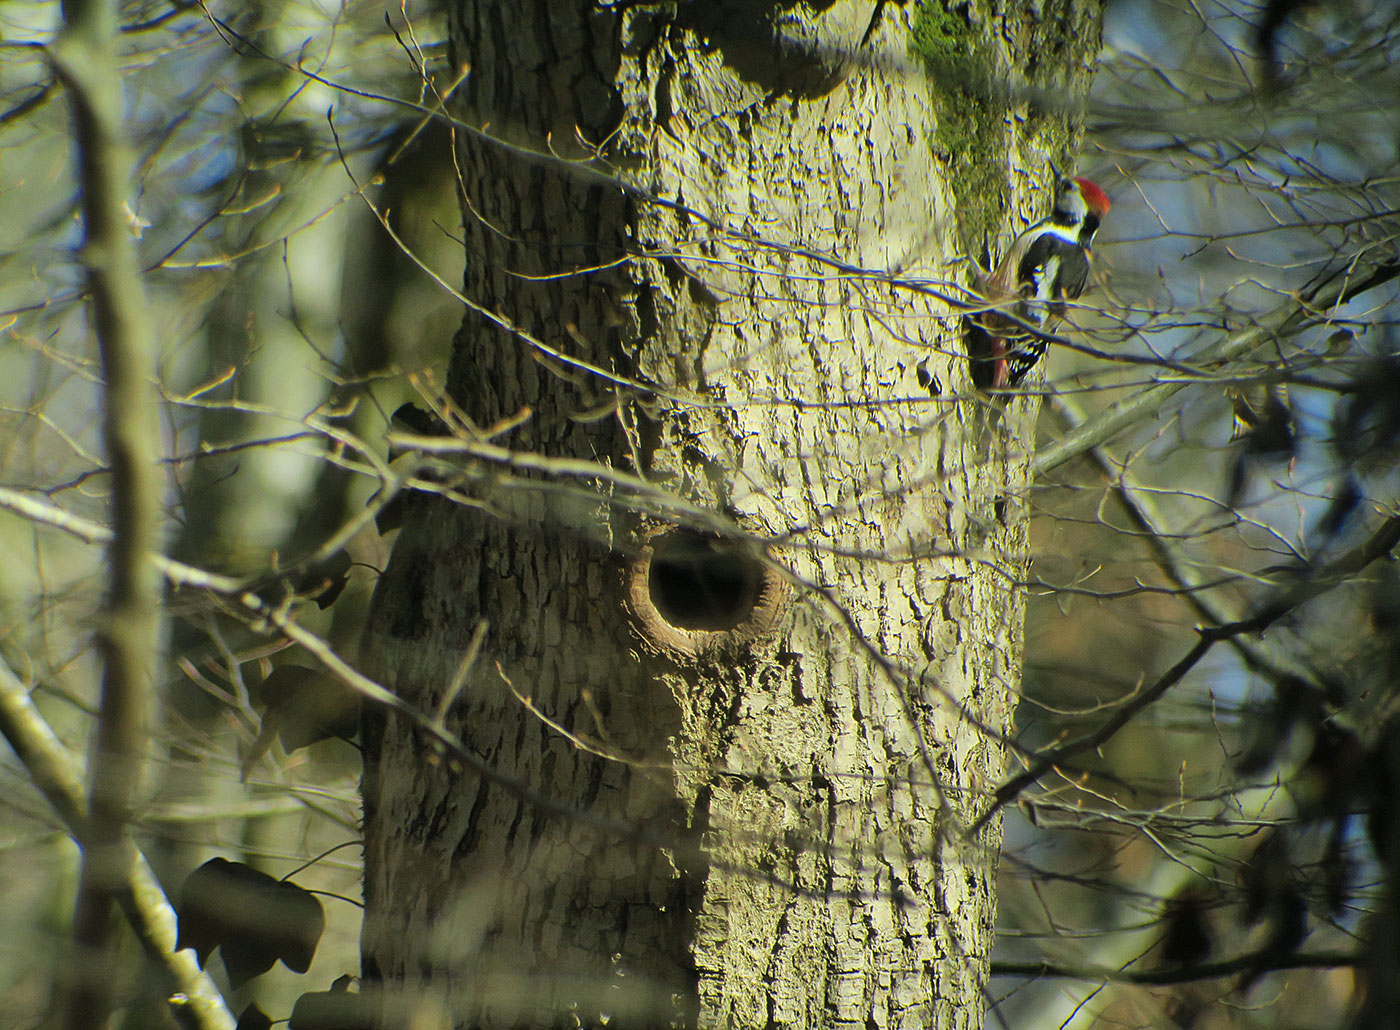 03_mittelspecht_middle-spotted-woodpecker_ammersee_2019-02-23_7097